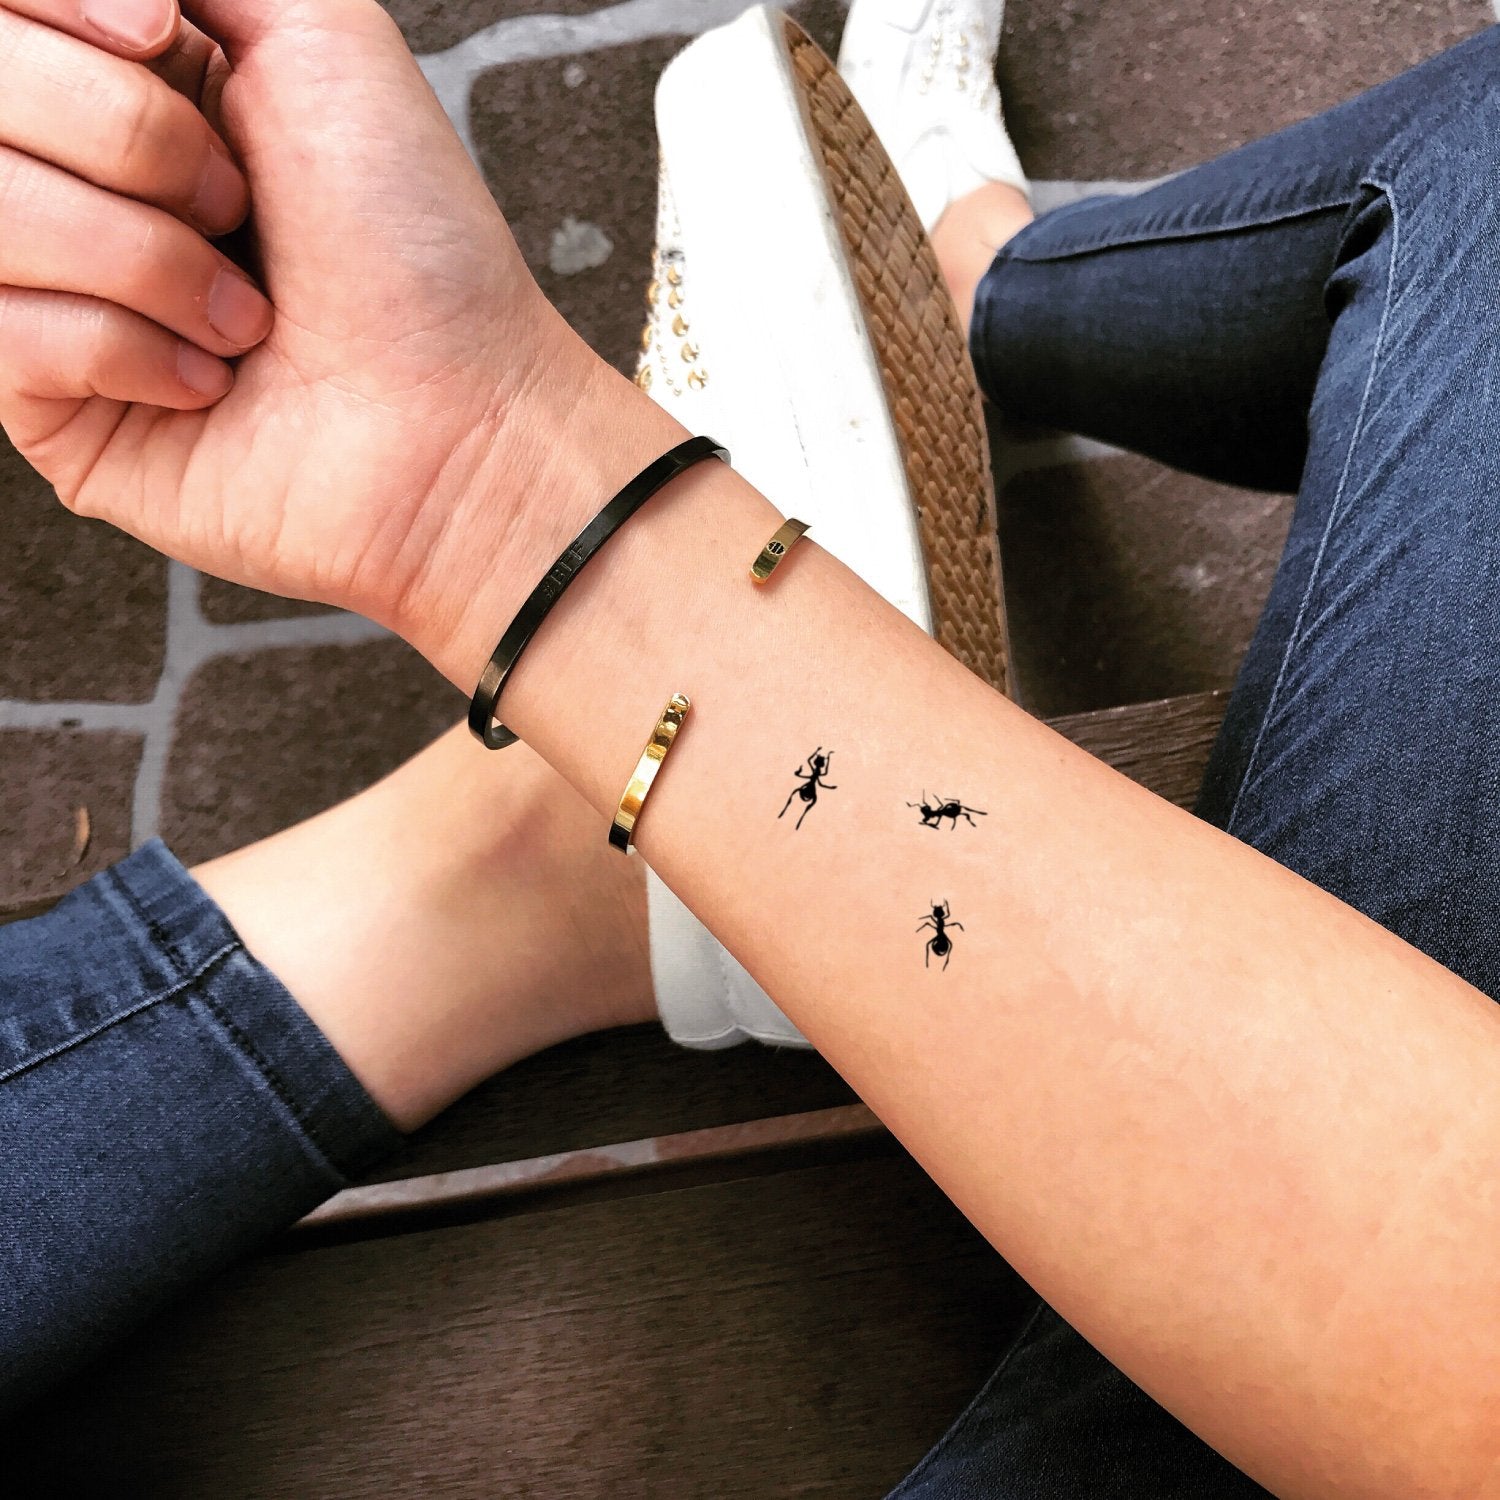 27 Insect Tattoos  POPSUGAR Beauty